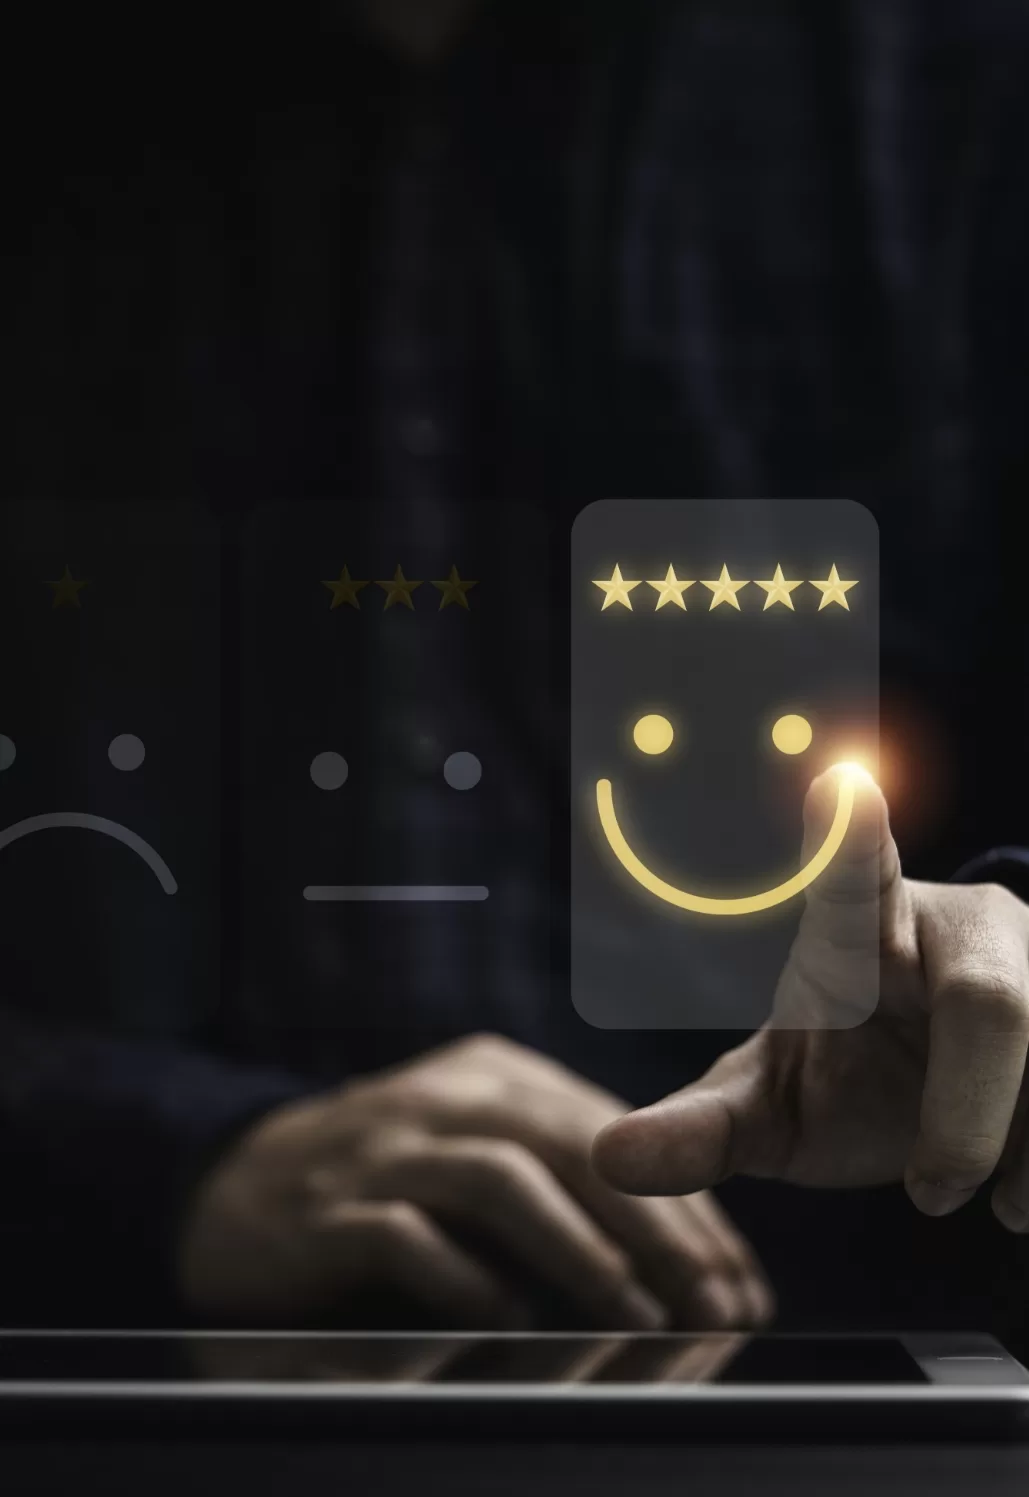 businessman-using-smartphone-select-smiley-face-icon-client-evaluation-customer-satisfaction-after-use-product-service-concept